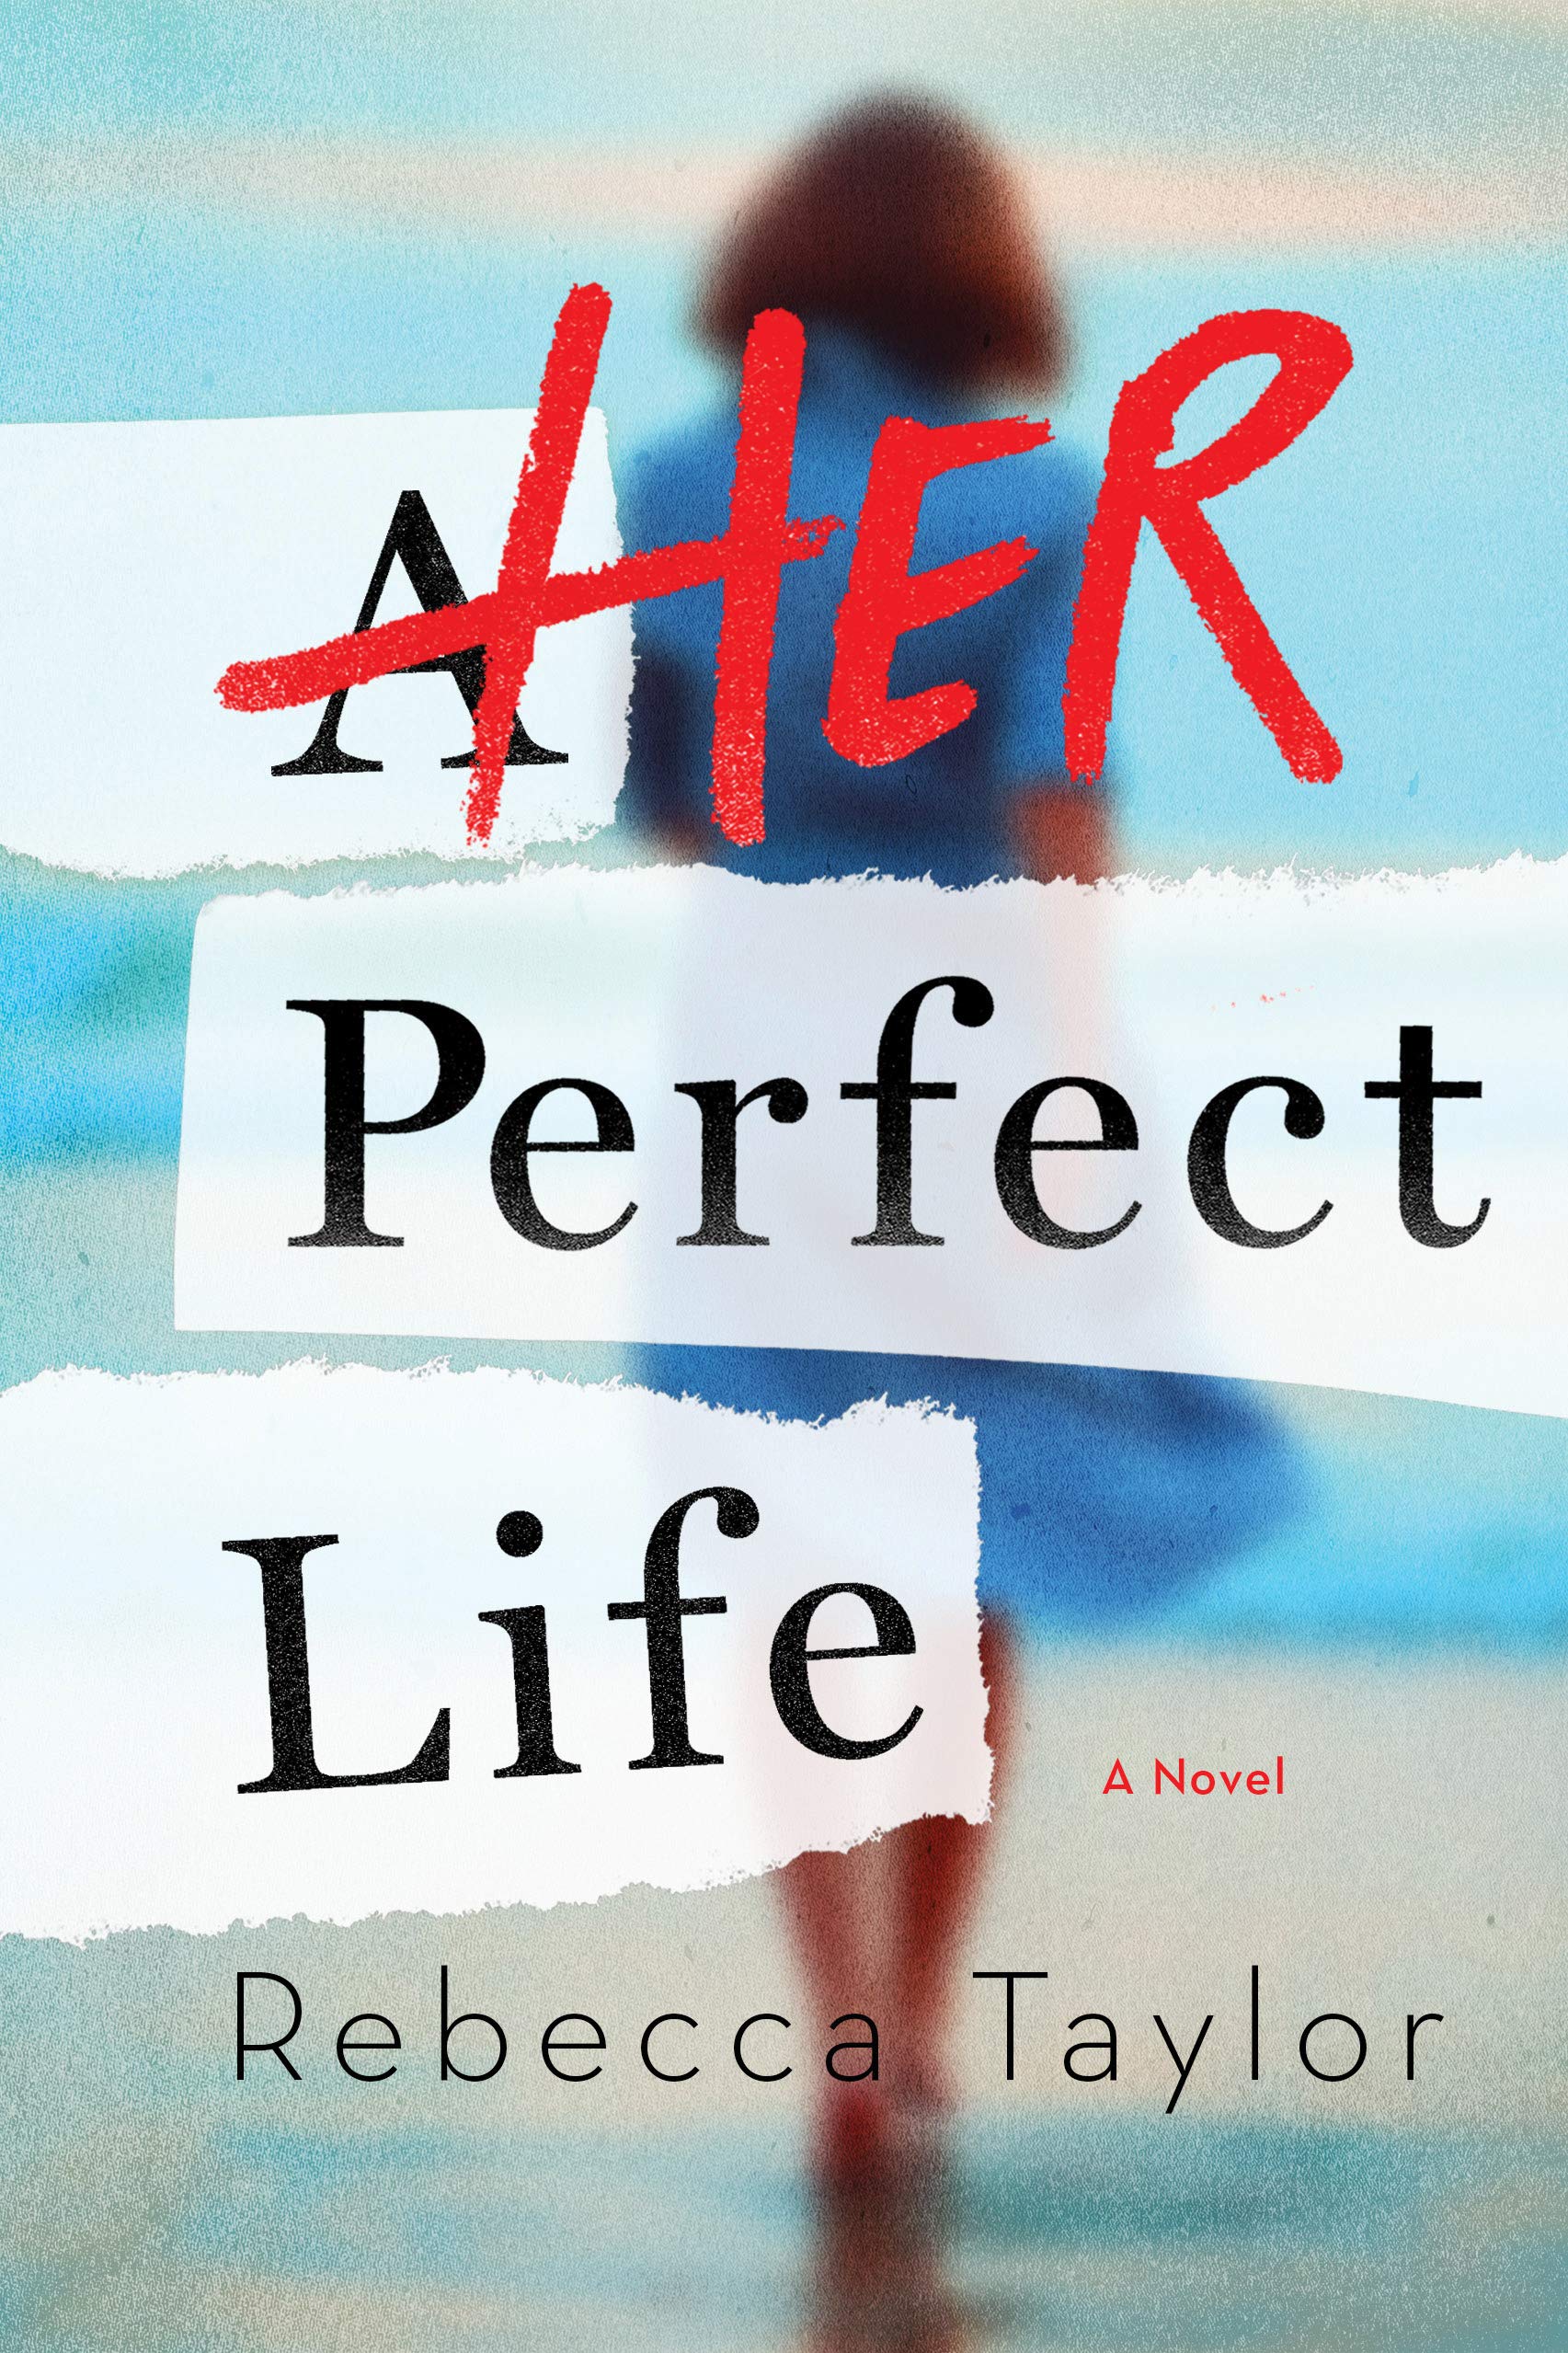 When Does Her Perfect Life By Rebecca Taylor Come Out? 2020 Thriller Releases